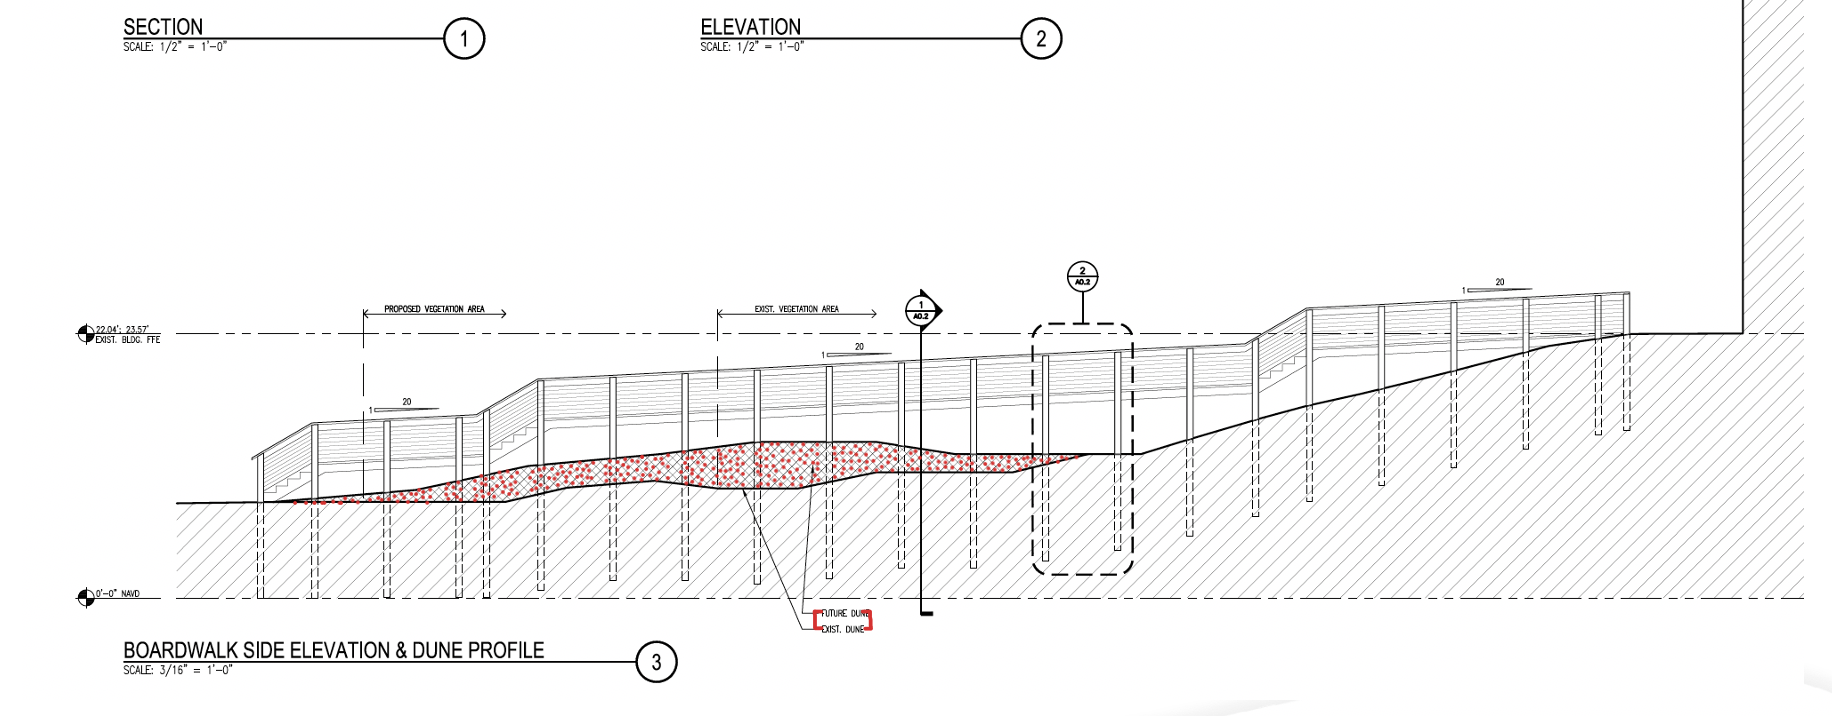 Blueprint of boardwalk extension and dune renourishment to curb erosion